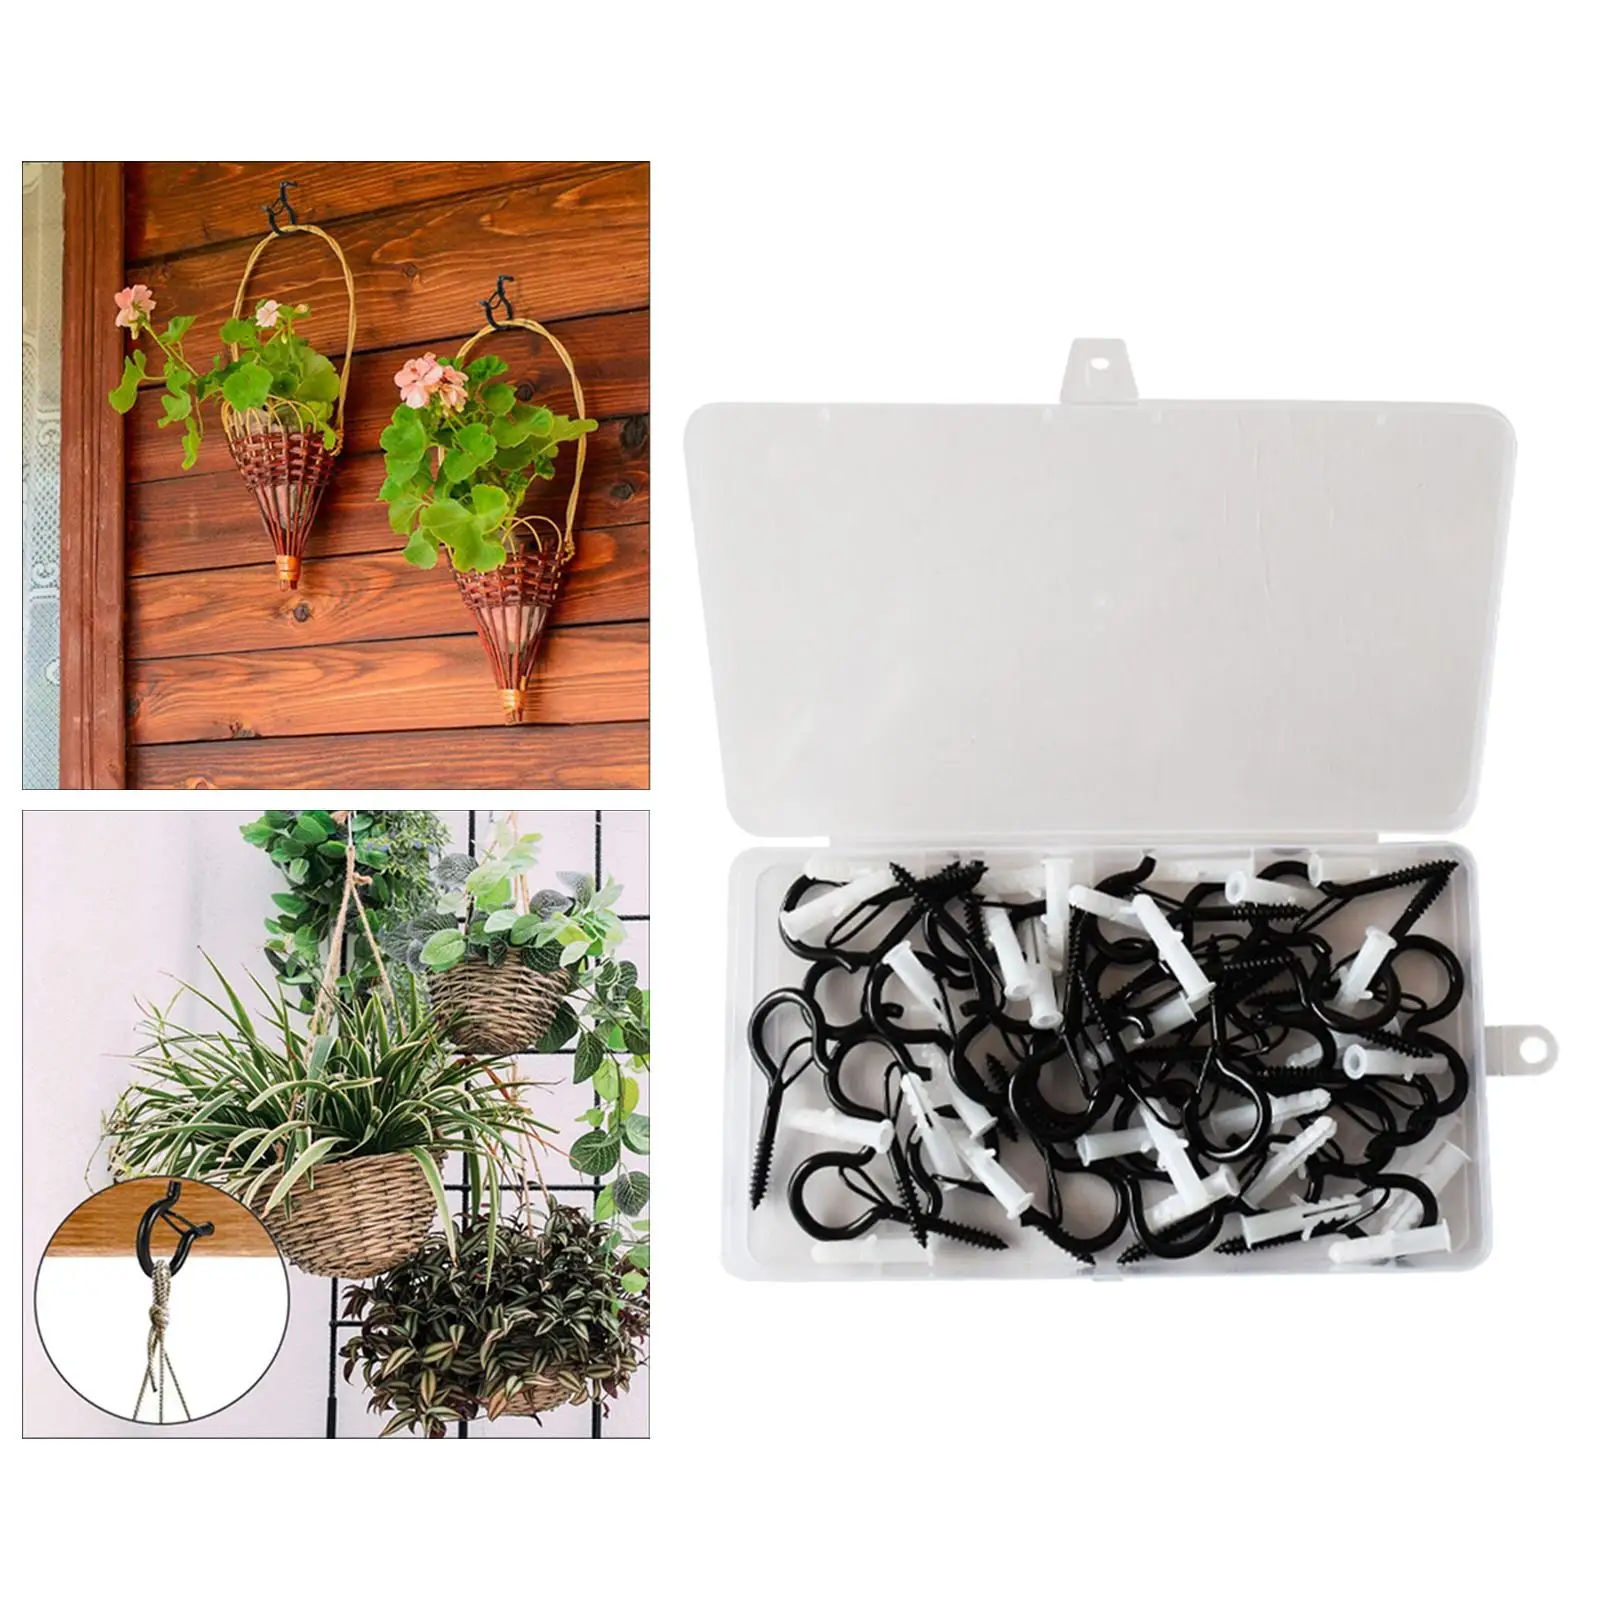 36Pcs Ceiling Q-Hanger Hooks Outdoor Windproof Home 2 Inches Screw Hanger for Party Wind Chimes Plants String Lights Black